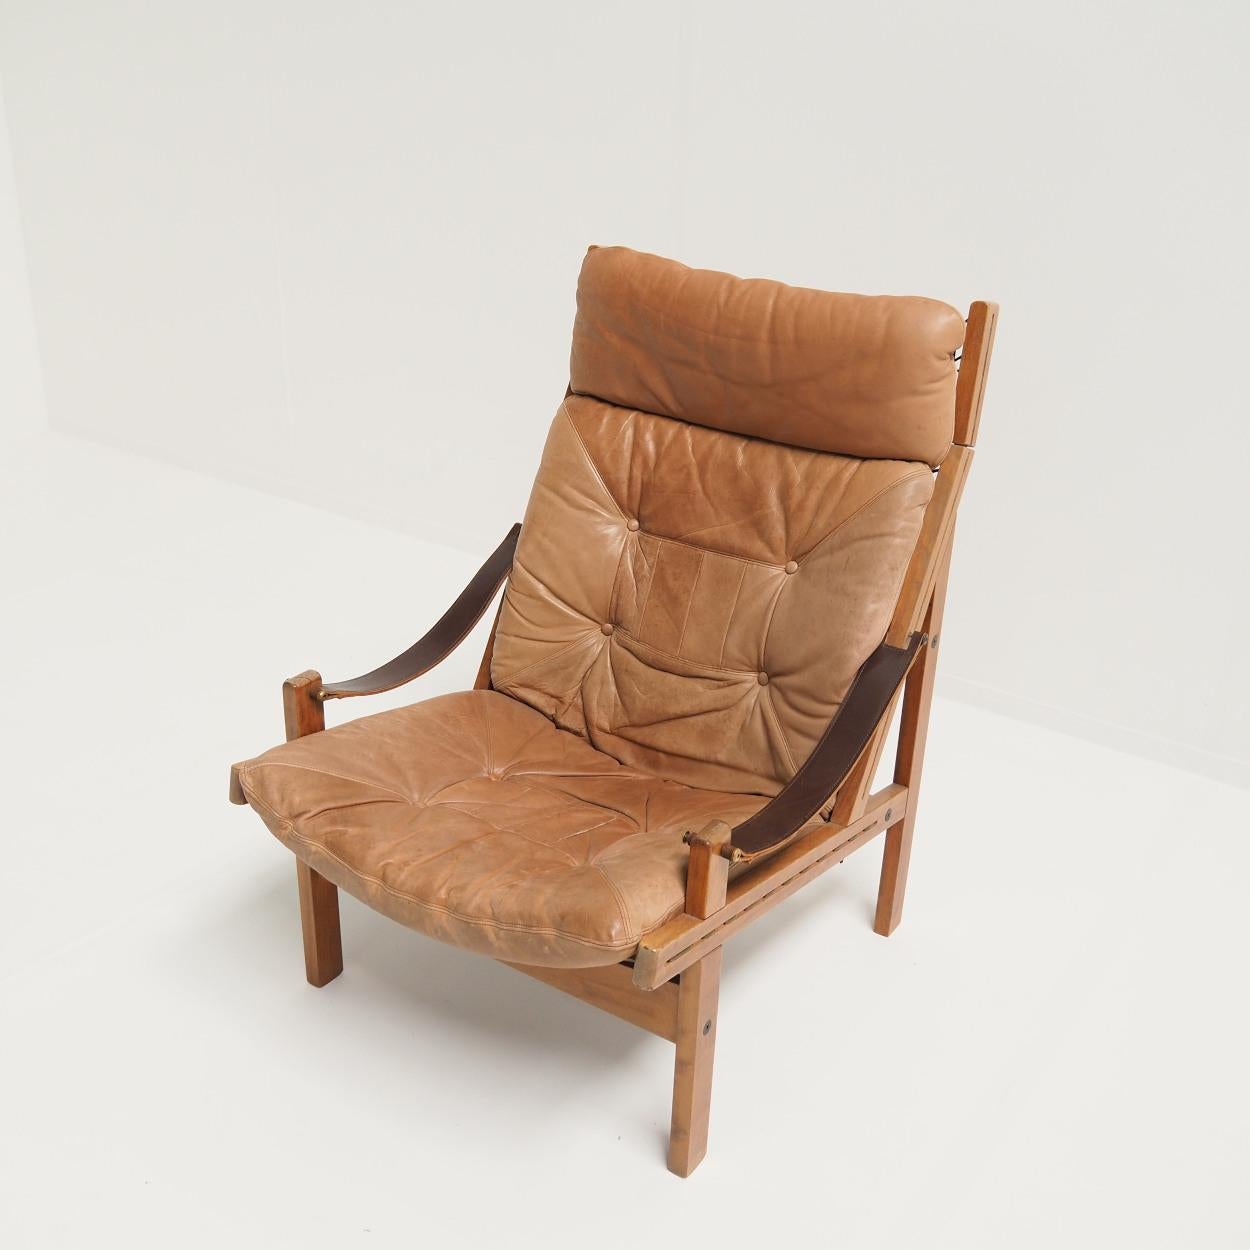 This beautiful 'Hunter Lounge Chair' by Torbjørn Afdal was designed in 1962. Please note its simple aesthetics and the wide variety of natural materials used. As the name suggests, this chair is designed to sit comfortably. And that's right, it's